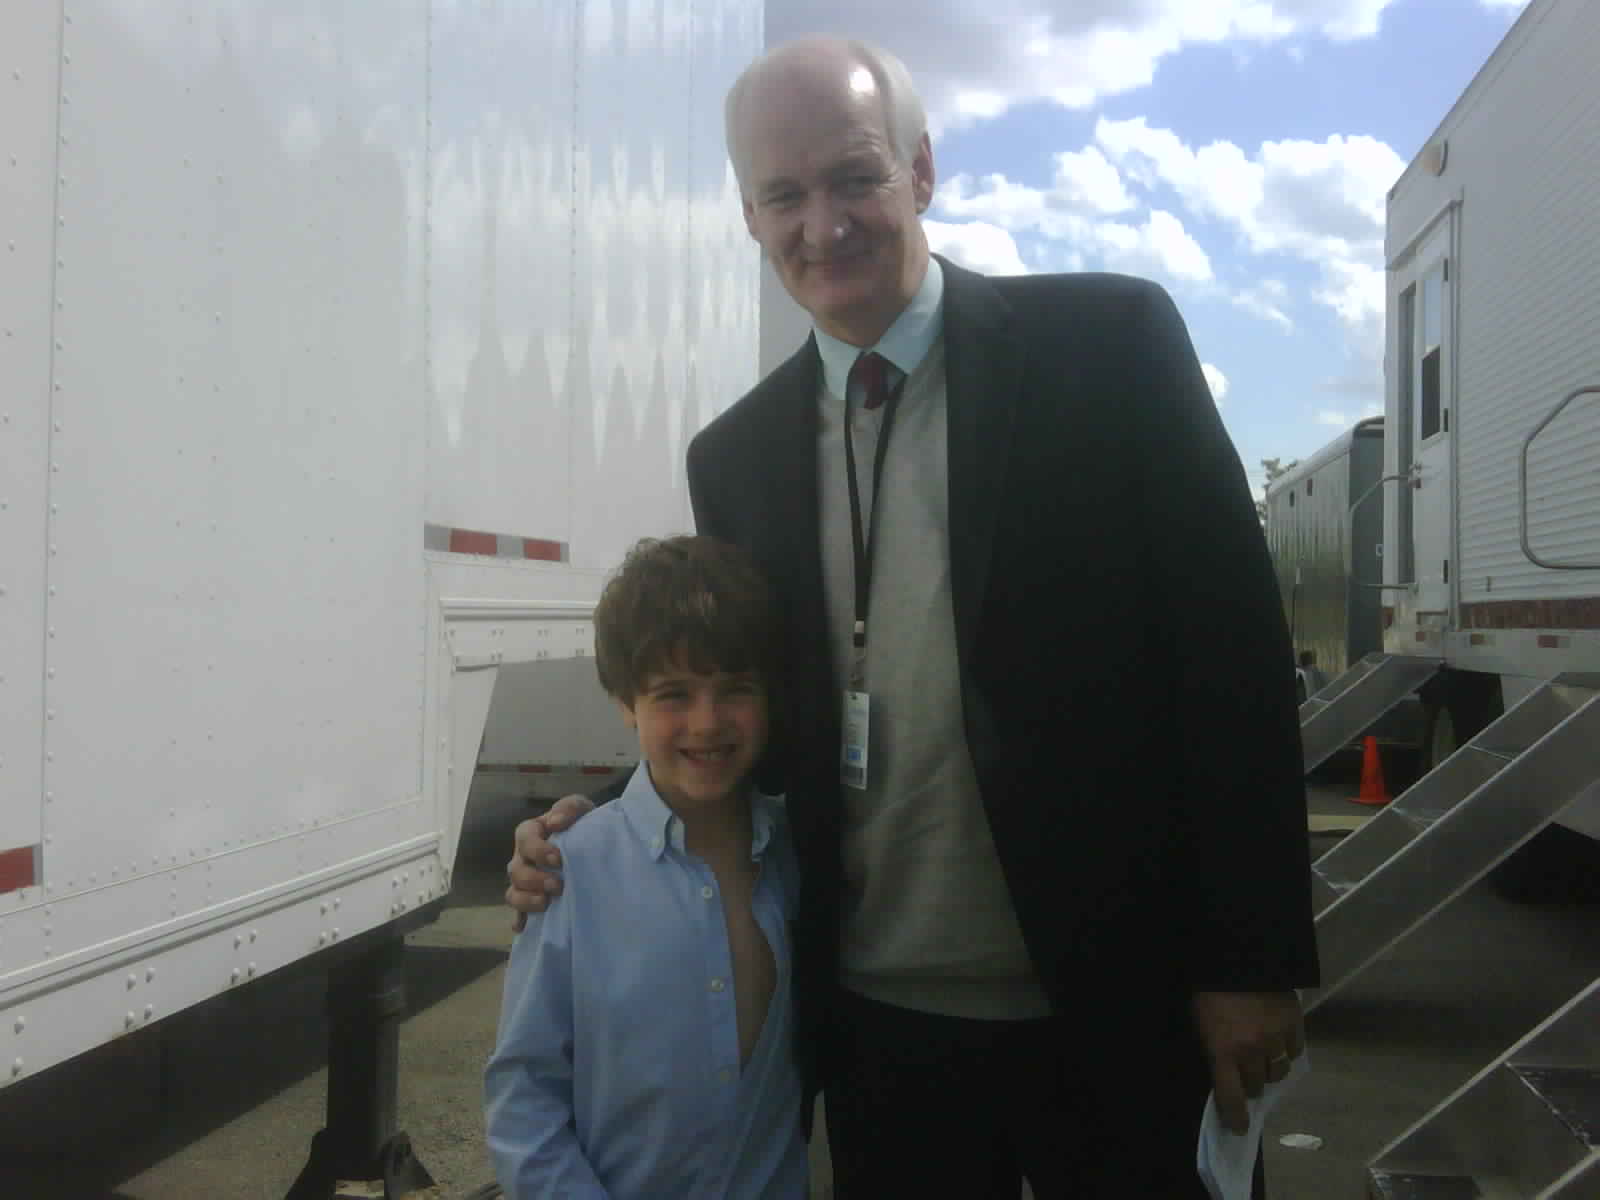 Jake Goodman and Colin Mochrie on the set of She's The Mayor, May 2010